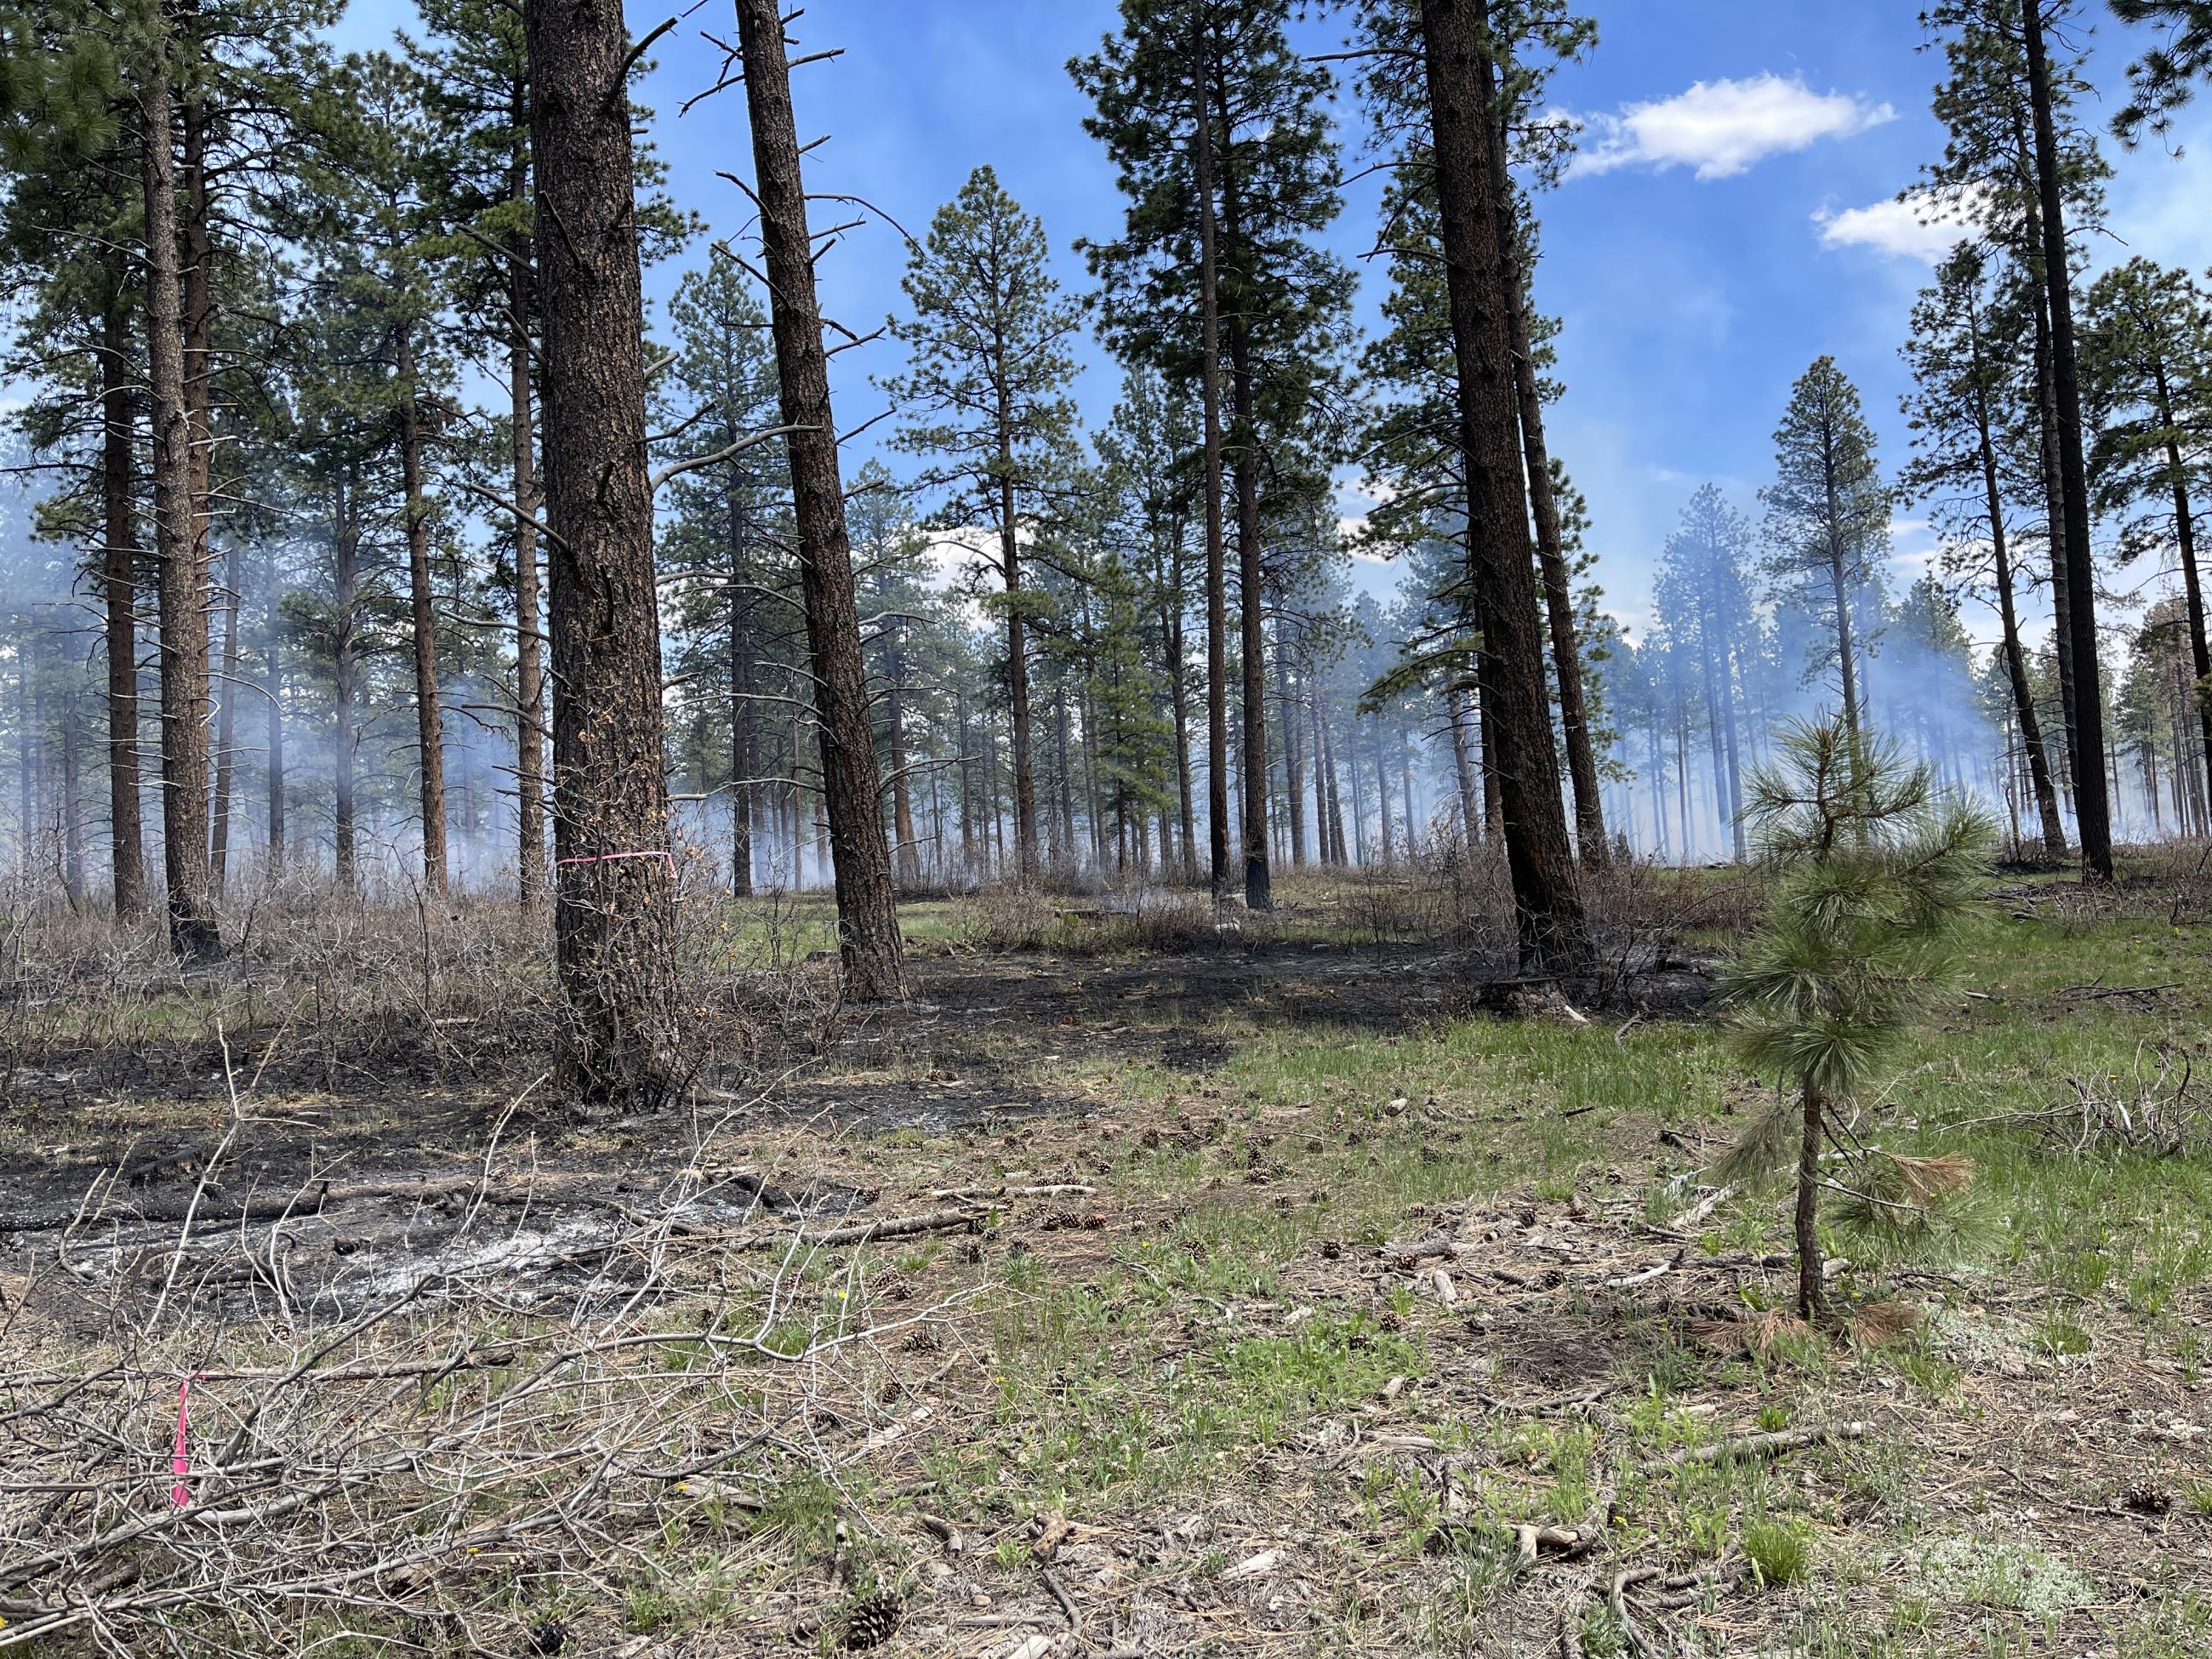 Photo shows a mix of unburned grass, burned brush and light smoke in the background